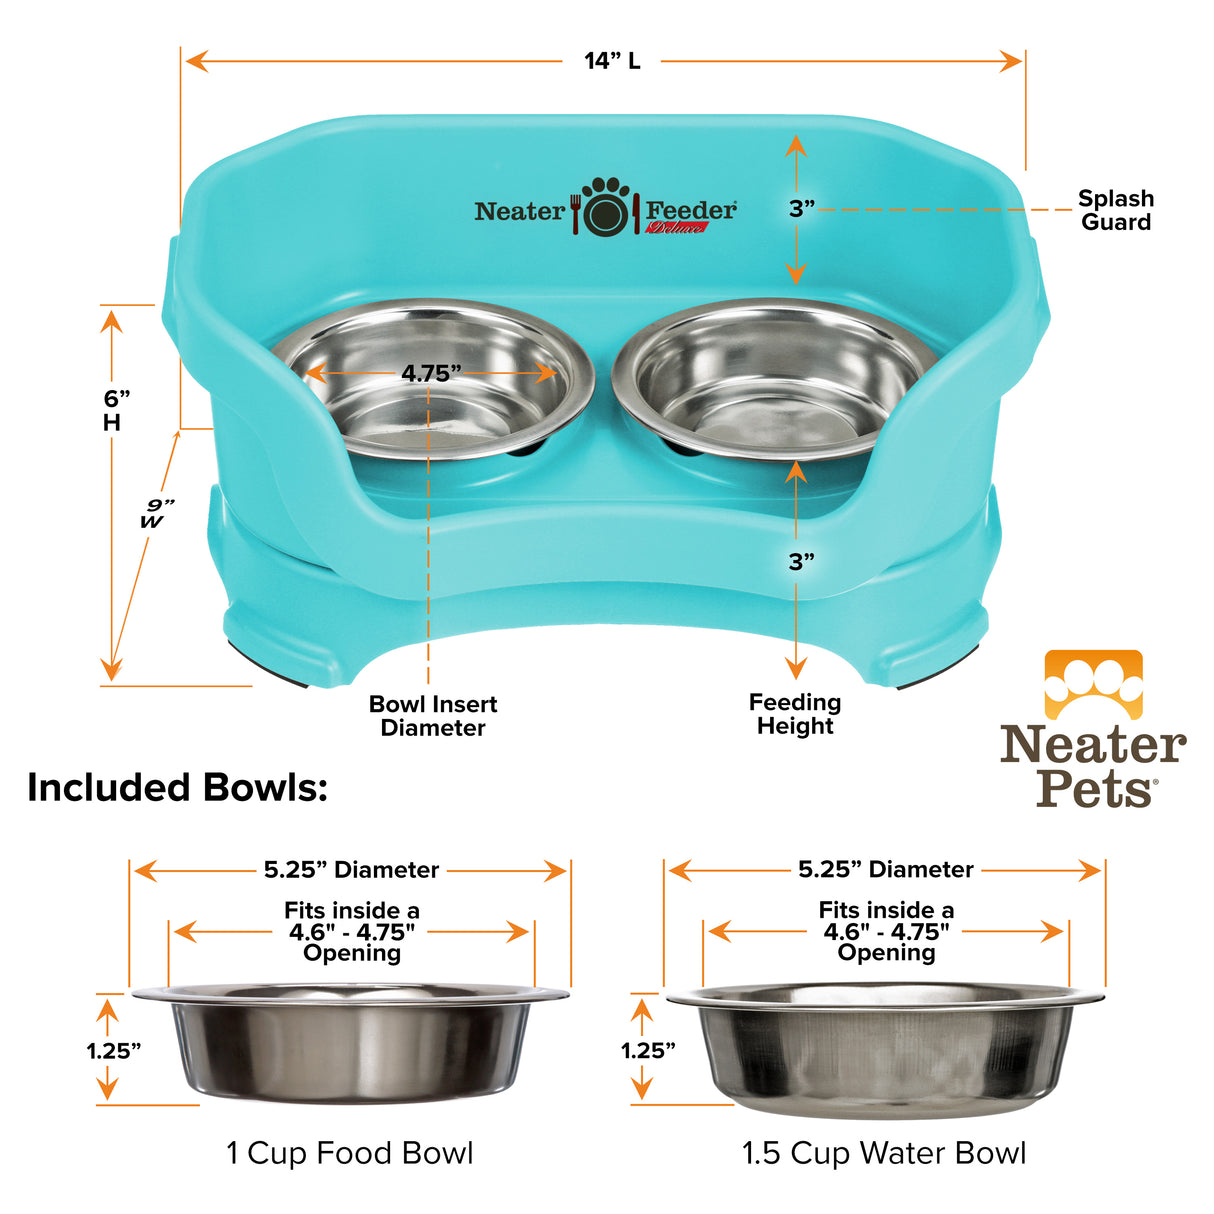 Deluxe Aqua Cat Neater Feeder and Bowl dimensions